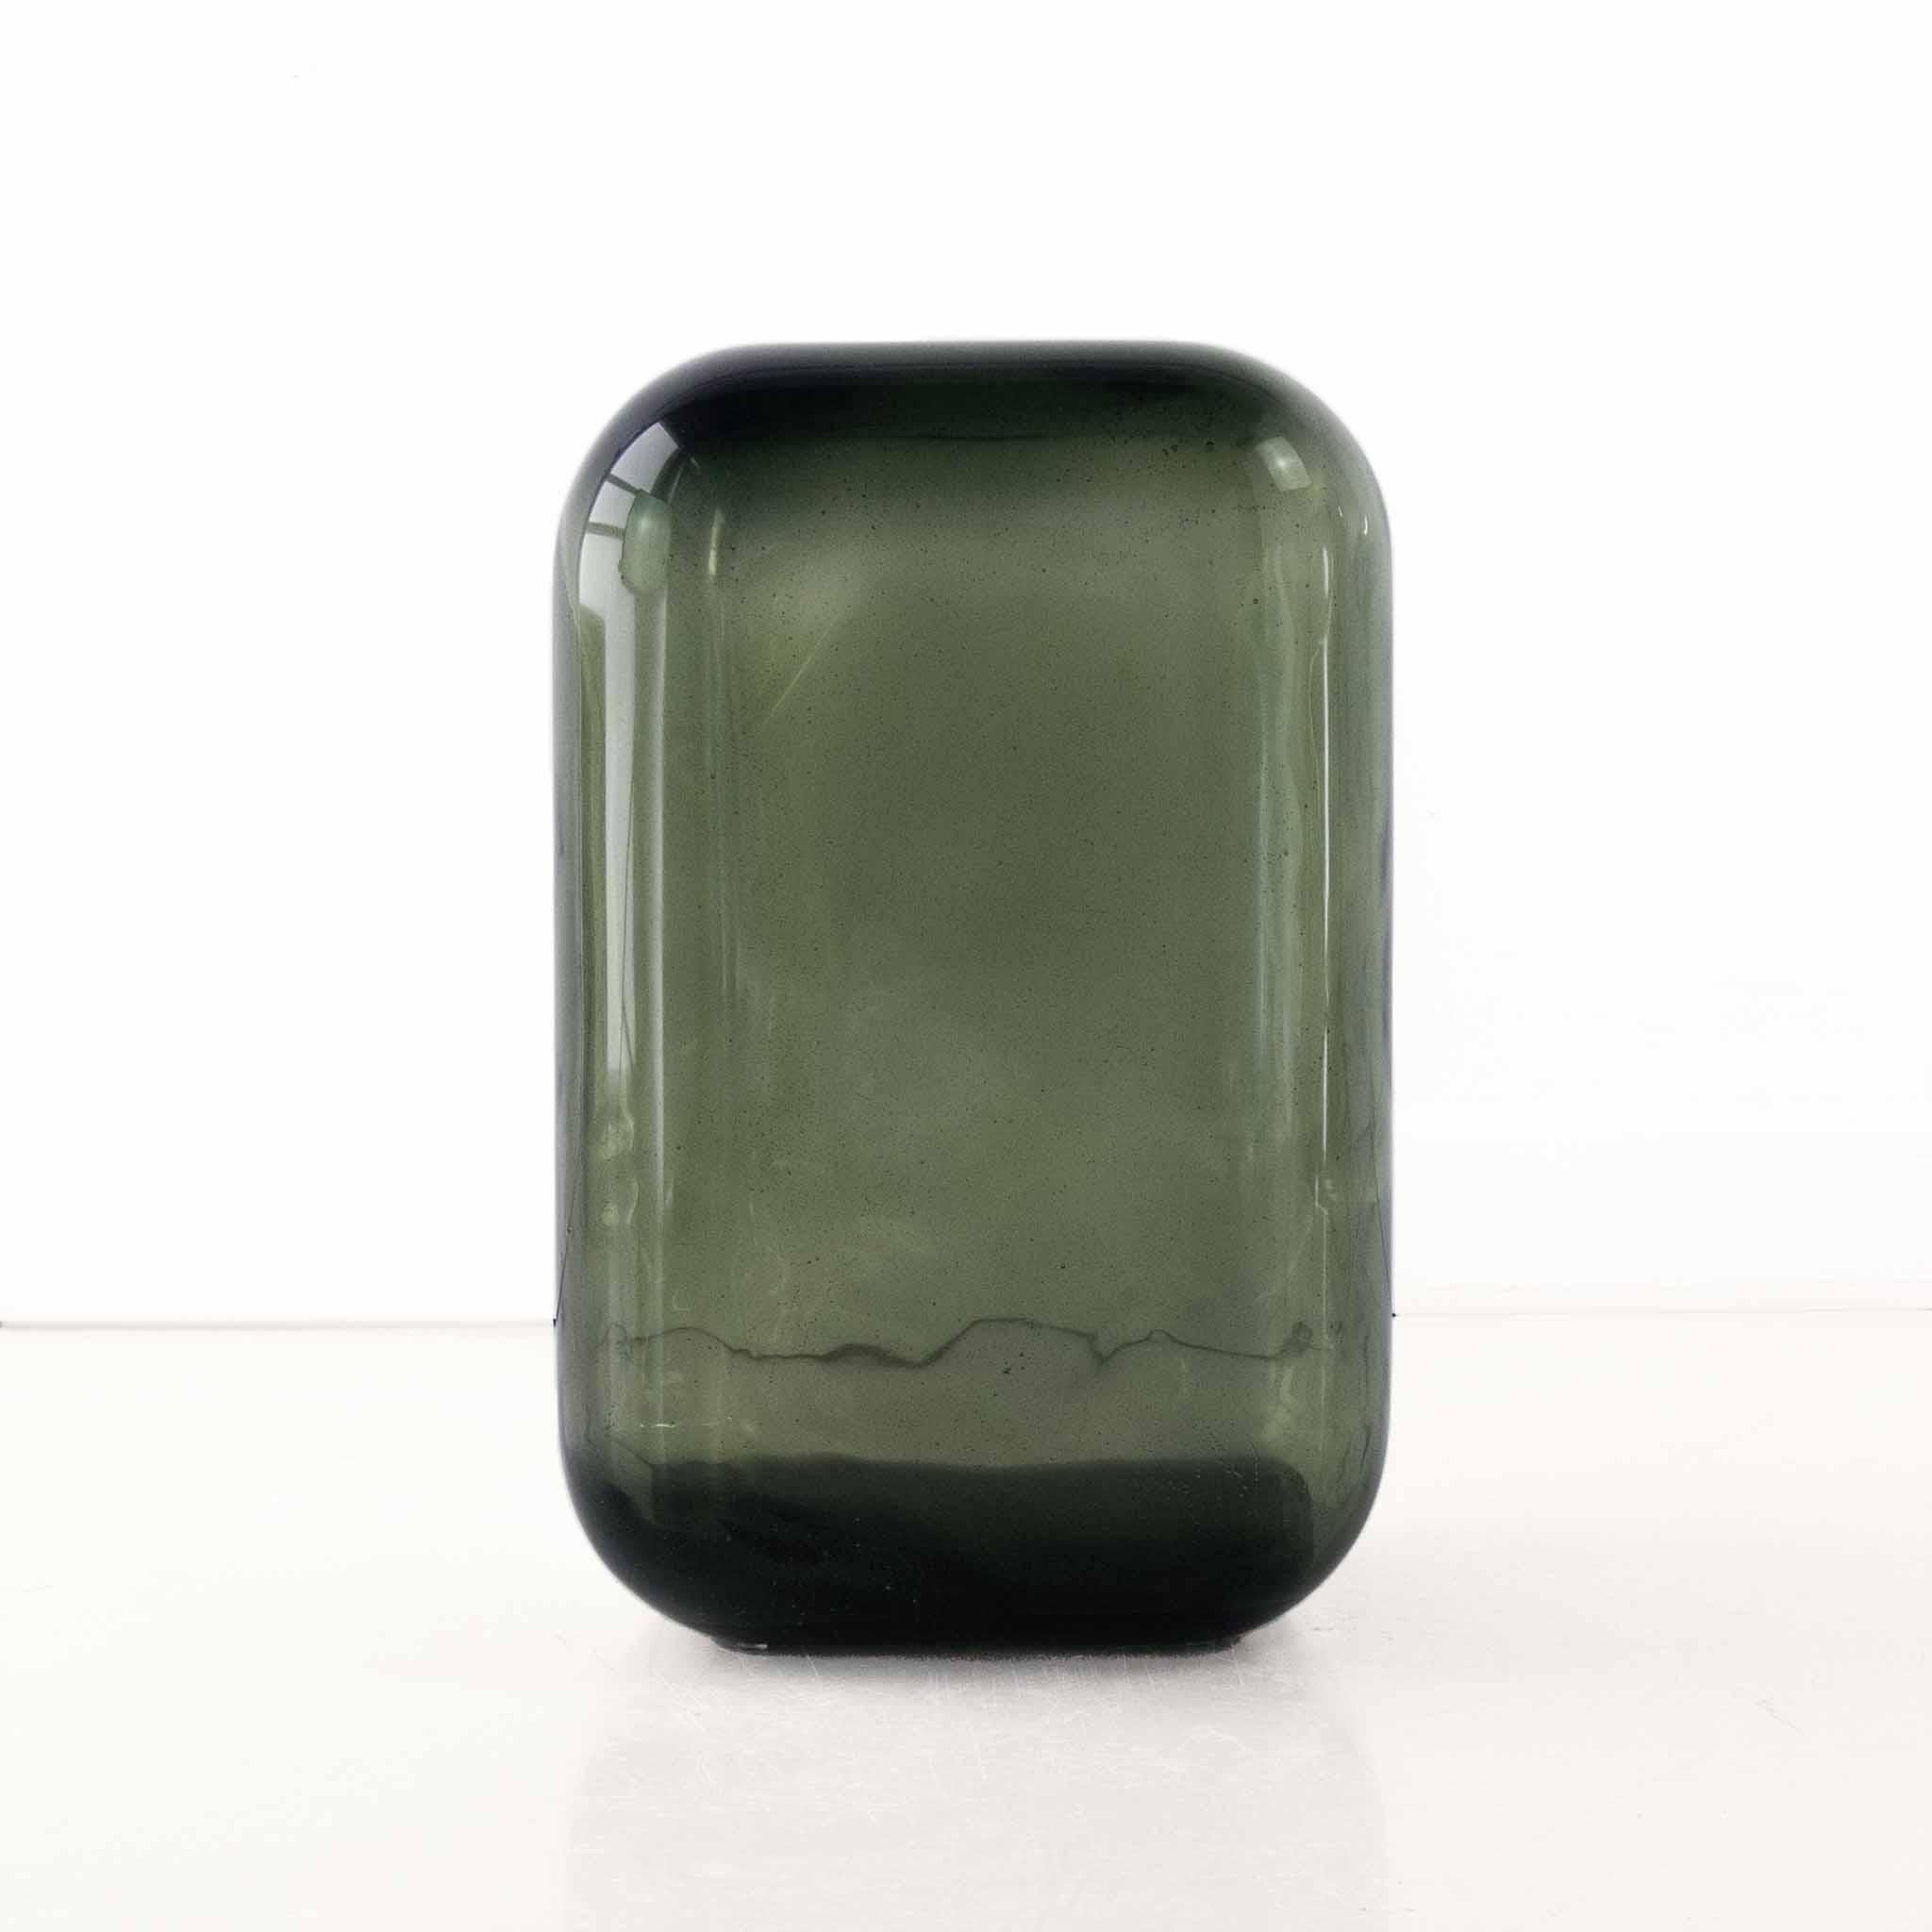 Tourmaline Oort Resin side table by creators of objects.
Materials: Resin, pigment
DImensions: W 36 x D 36 x H 56 cm
Also Available: Tourmaline, Bordeaux, Spice, Ochre, Forest, Ocean, Twilight, Rock, Lilac, Cerise, Coral Spice, Honey, Moss, Surf,